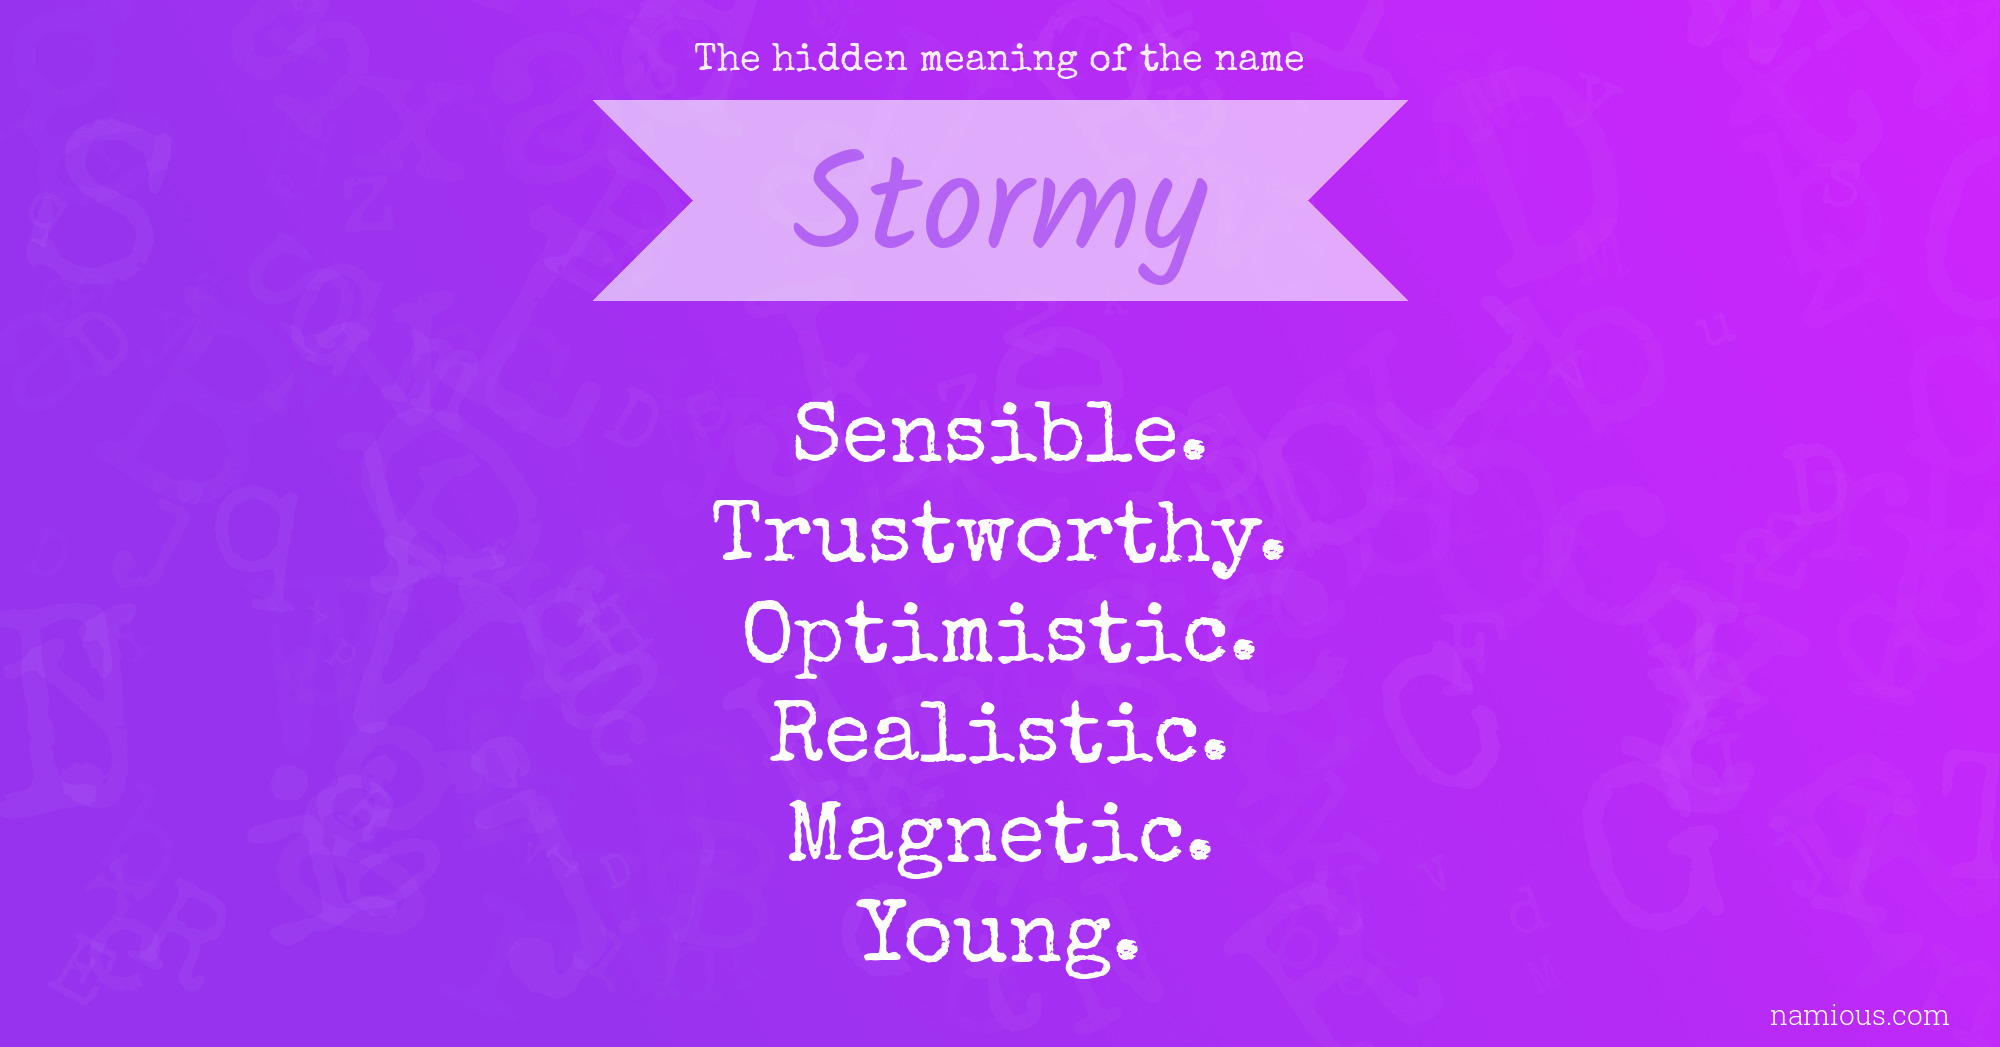 The hidden meaning of the name Stormy